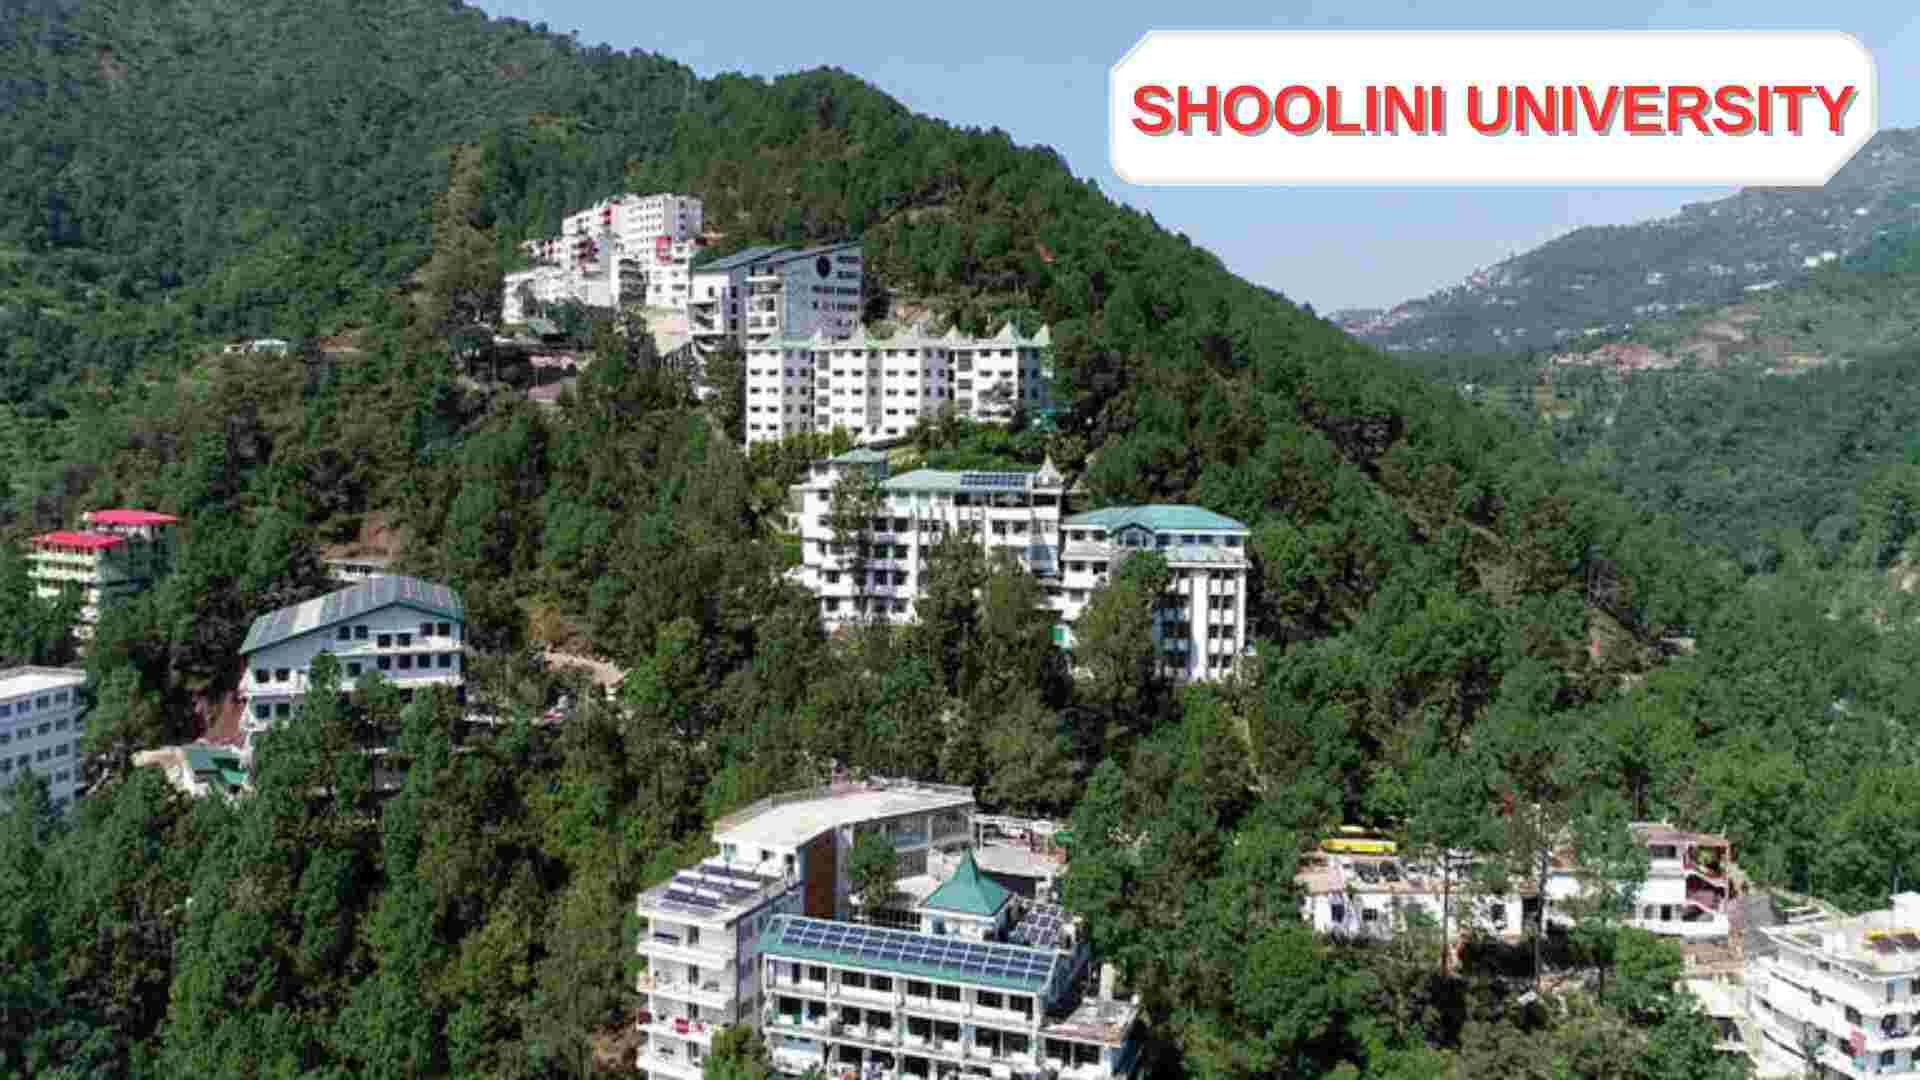 Shoolini Retains Top Spot As No.1 Private University In India